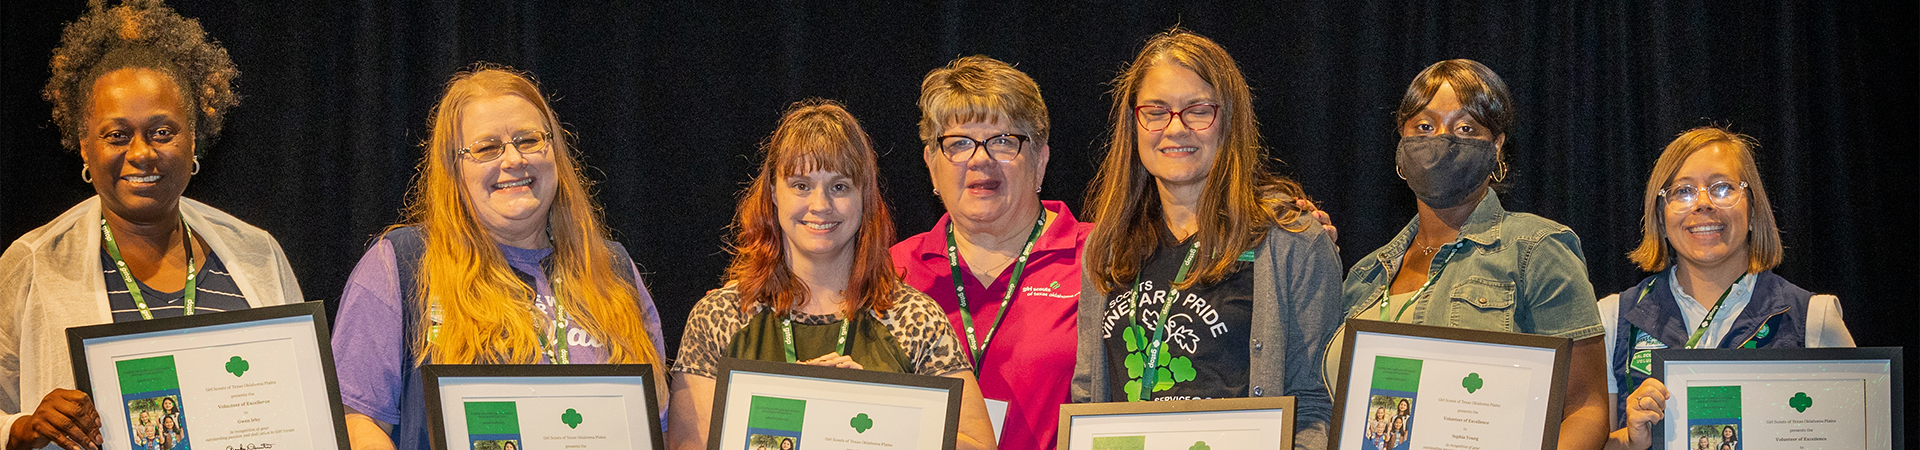  volunteers with awards 